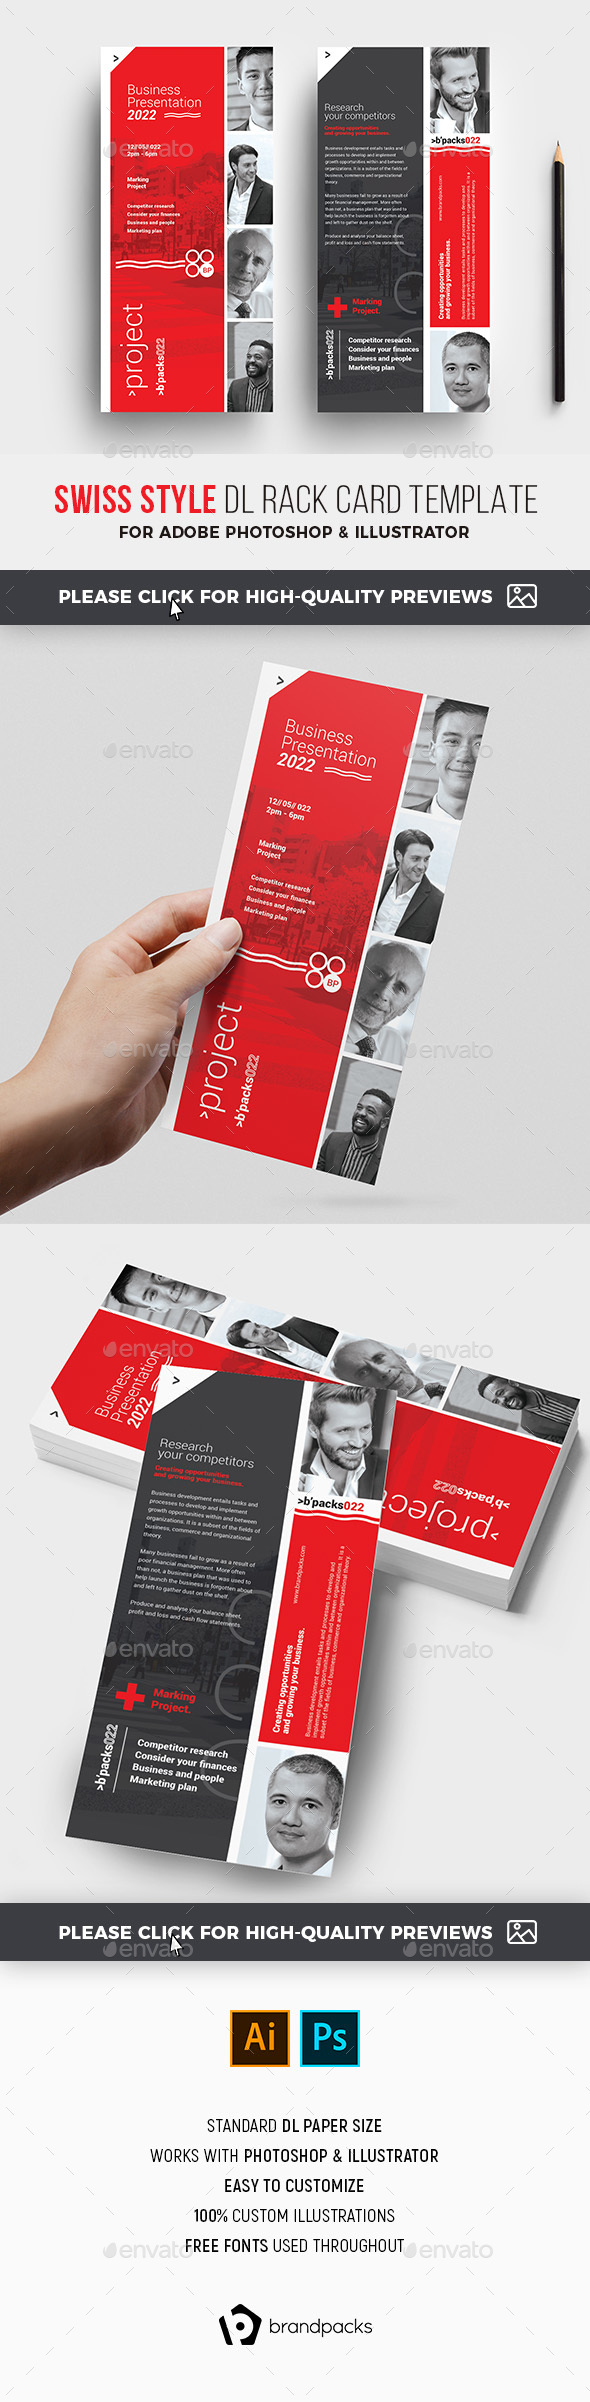 Swiss Style DL Card Template